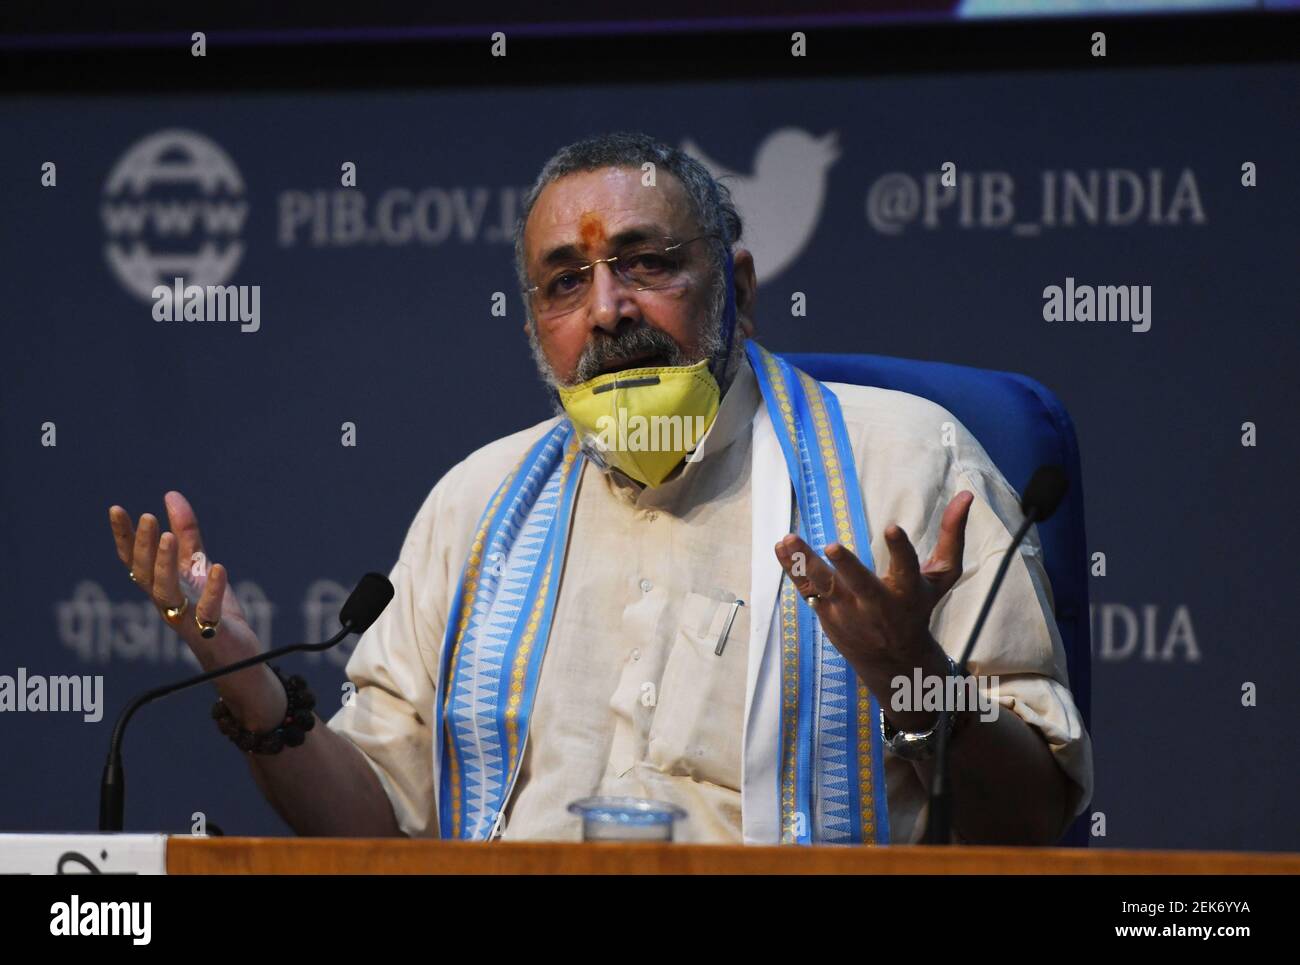 NEW DELHI, INDIA - JUNE 24: Union Minister for Fisheries, Animal Husbandry  and Dairying Giriraj Singh addressing the media after a Cabinet meeting, at  National Media Centre on June 24, 2020 in